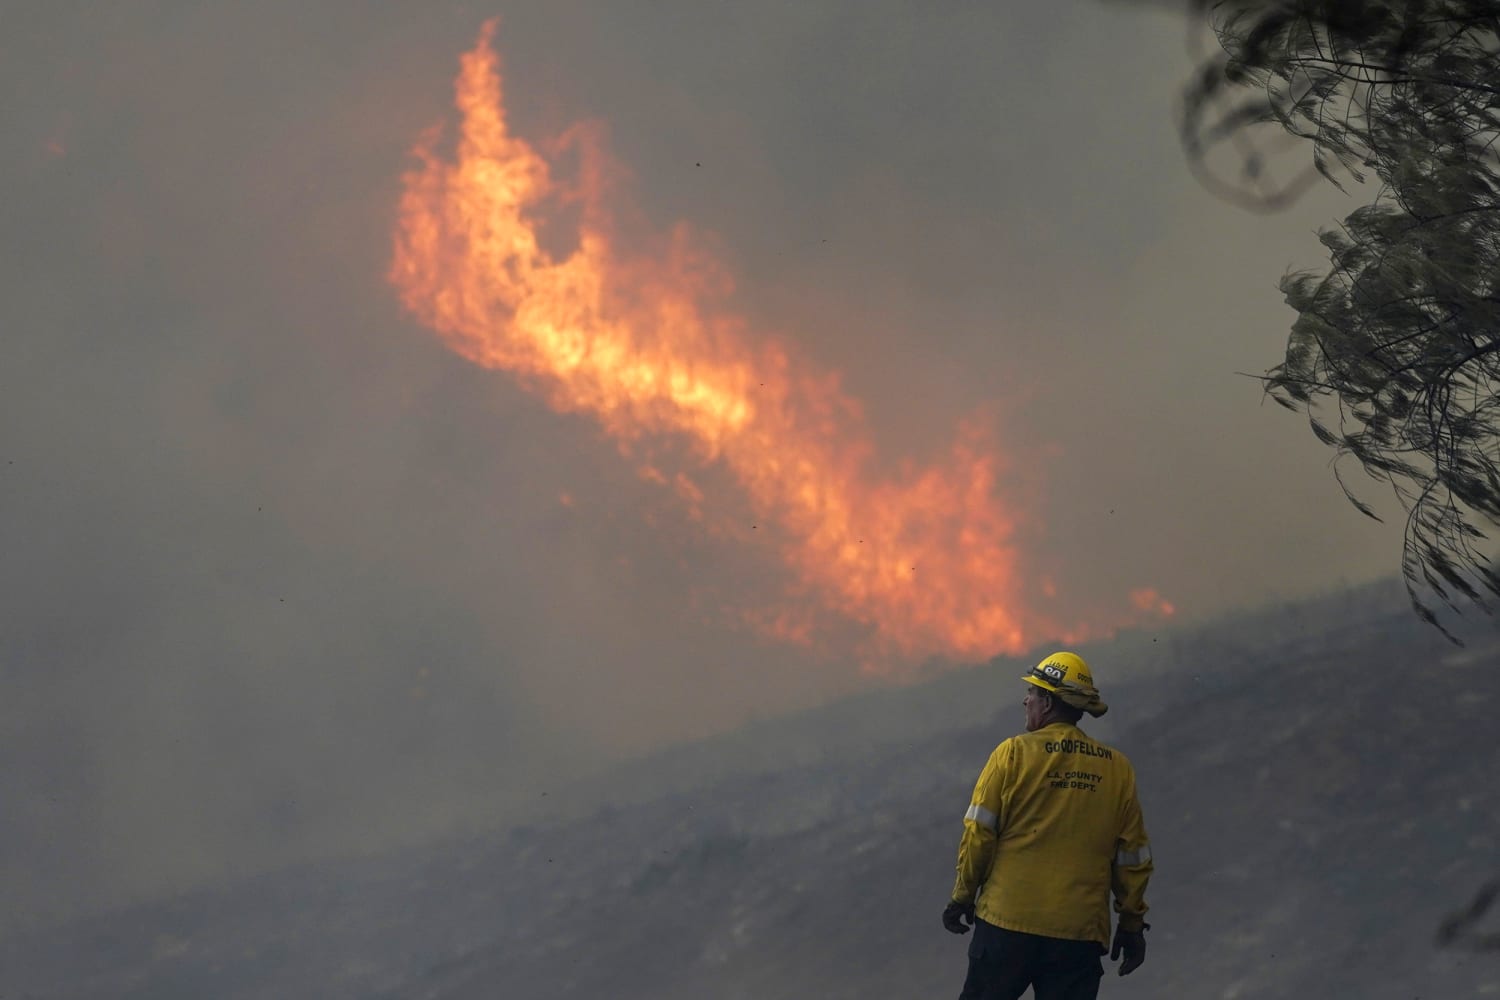 Extreme heat wave grips California as brush fire closes interstate